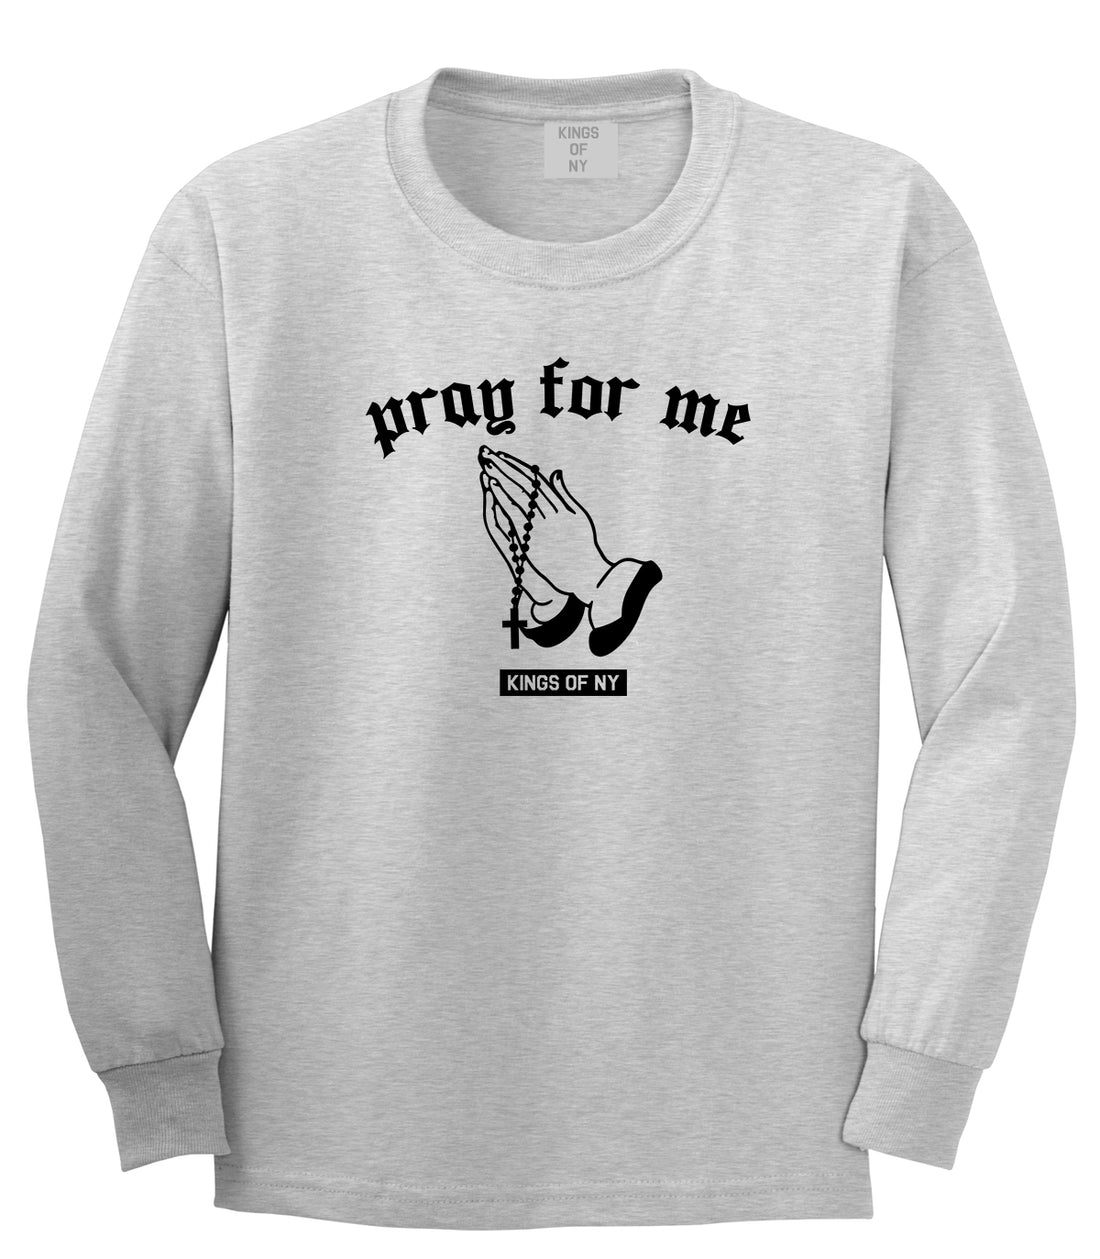 Pray For Me Mens Long Sleeve T-Shirt Grey by Kings Of NY